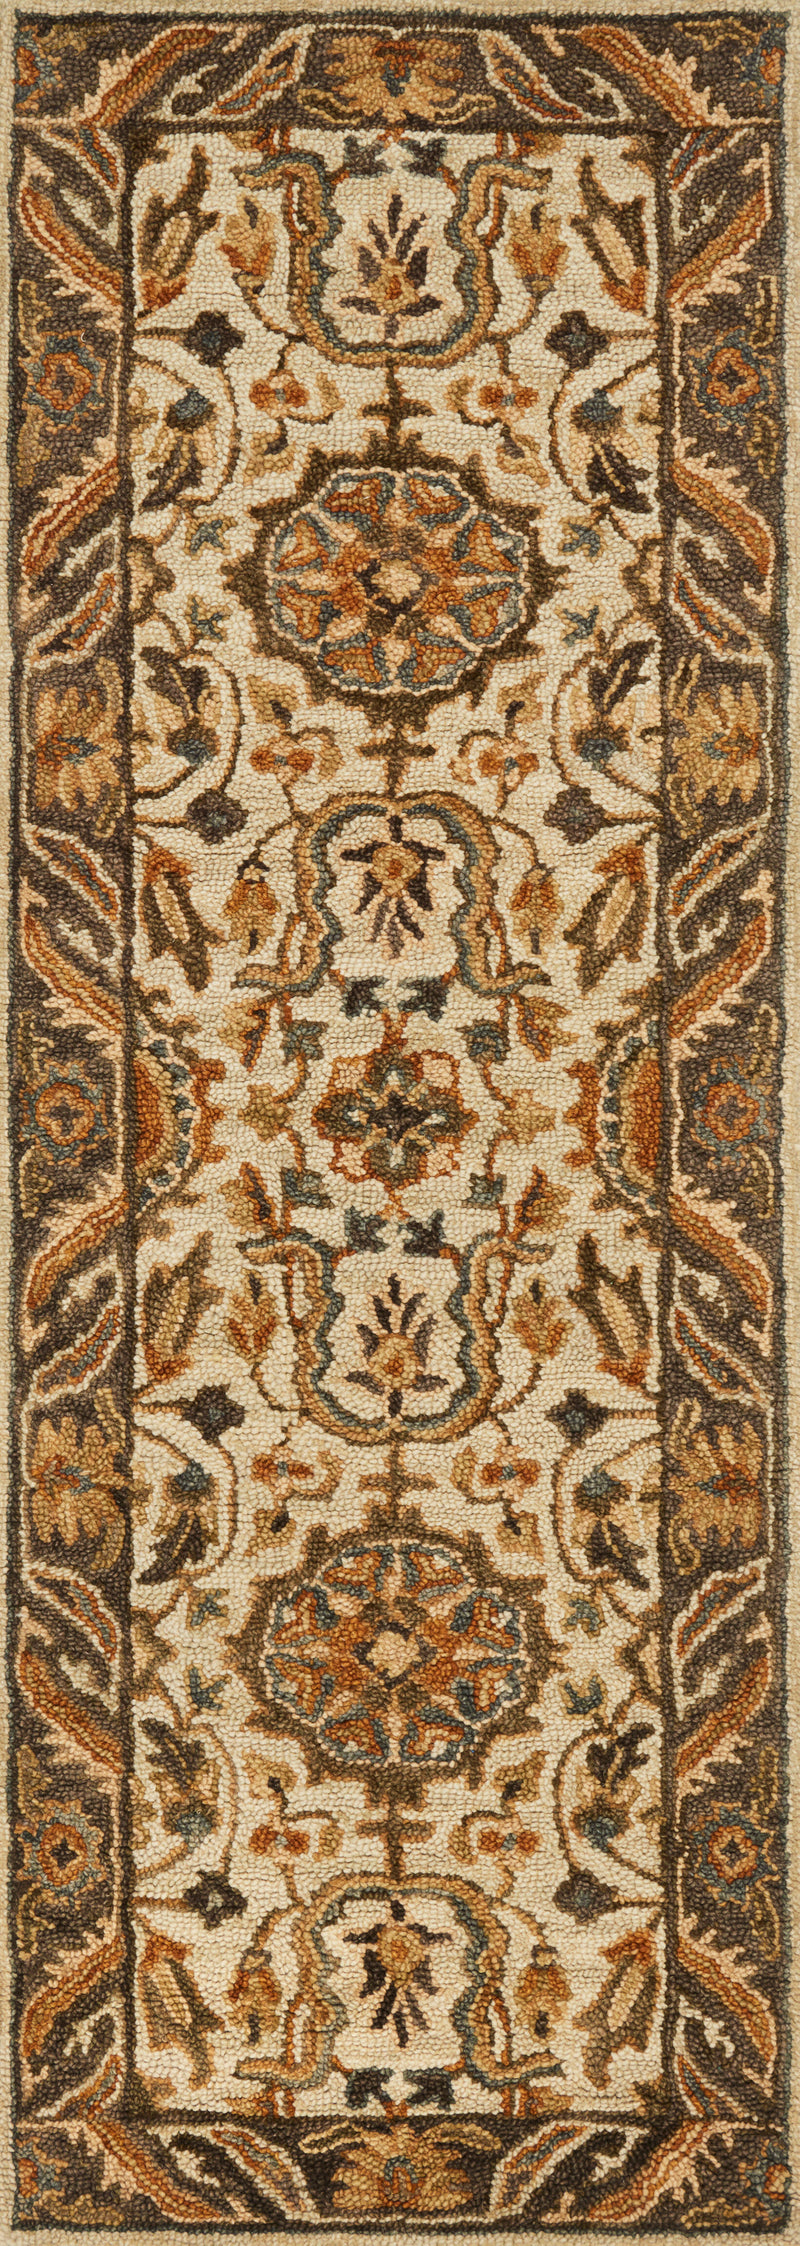 VICTORIA Collection Wool Rug  in  IVORY / DK TAUPE Ivory Accent Hand-Hooked Wool